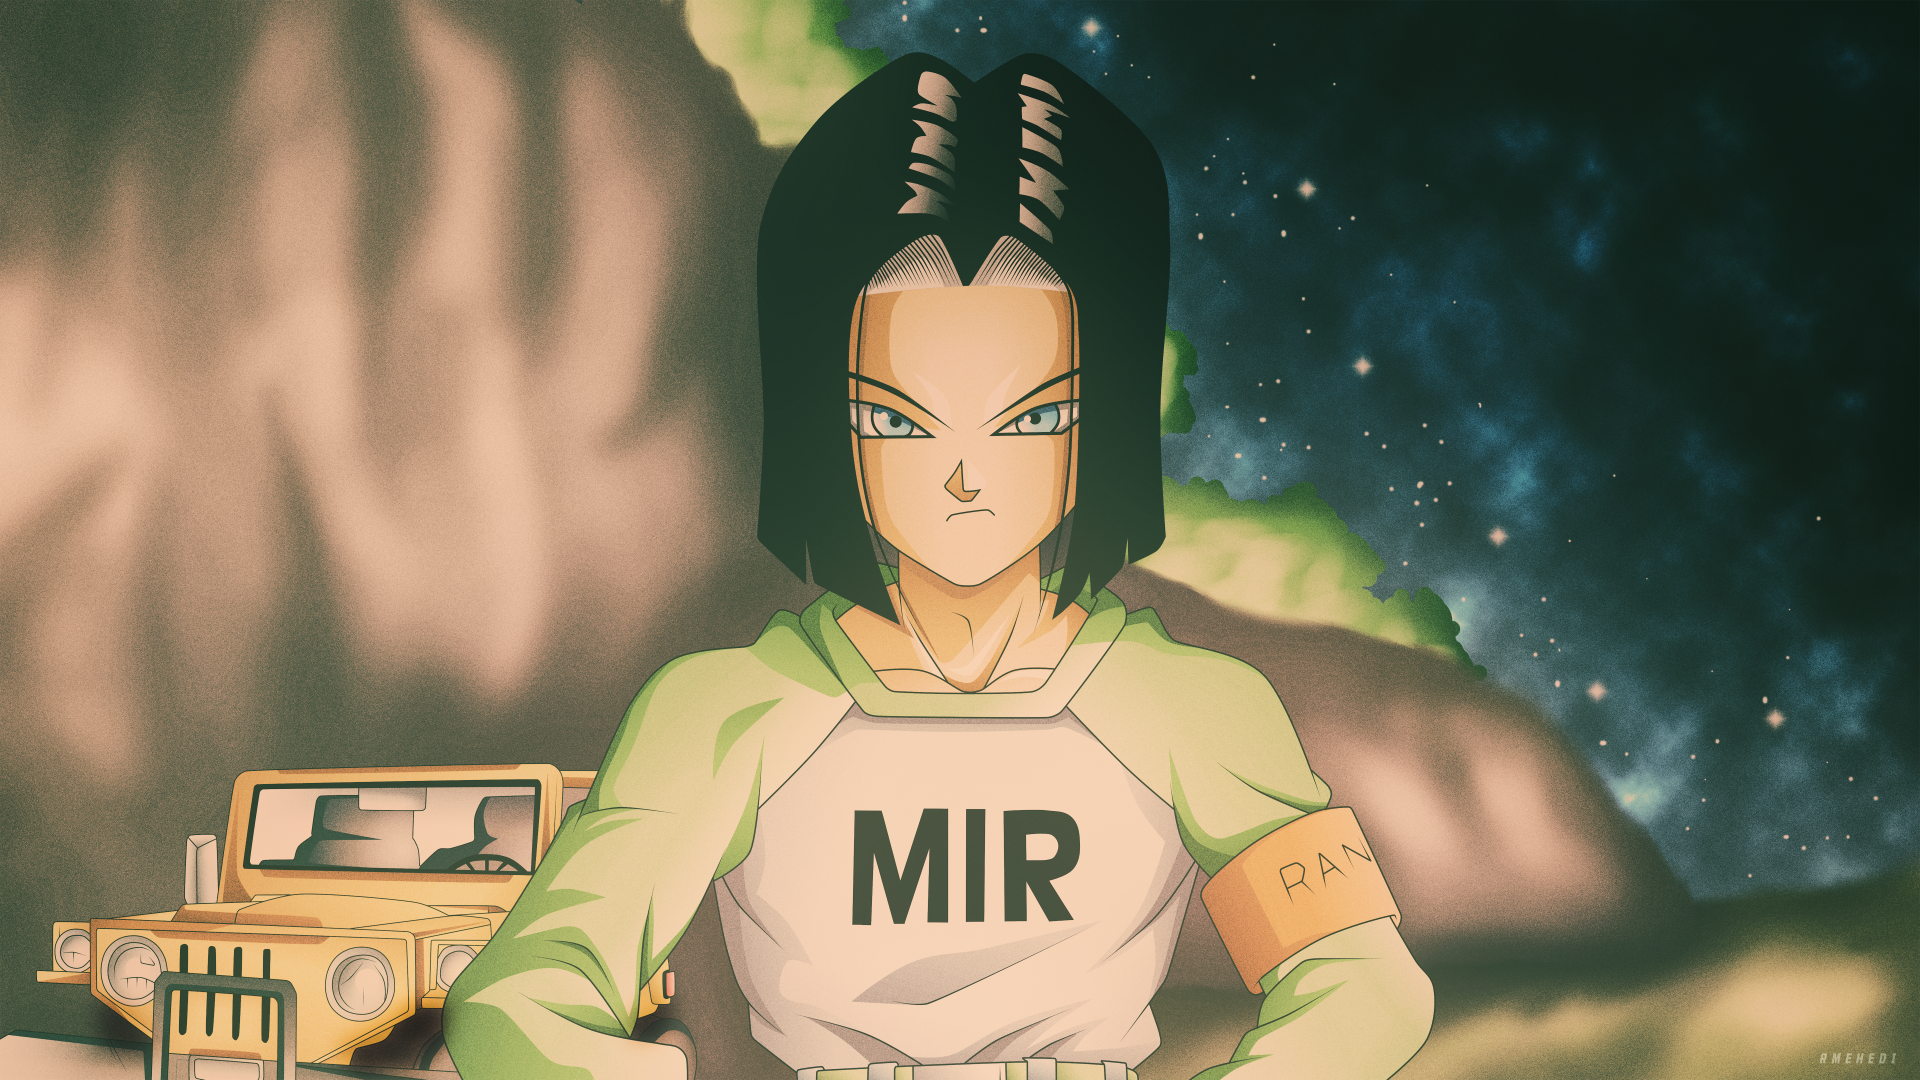 Android 17 (Dragon Ball) 1080P, 2K, 4K, 5K HD wallpapers free